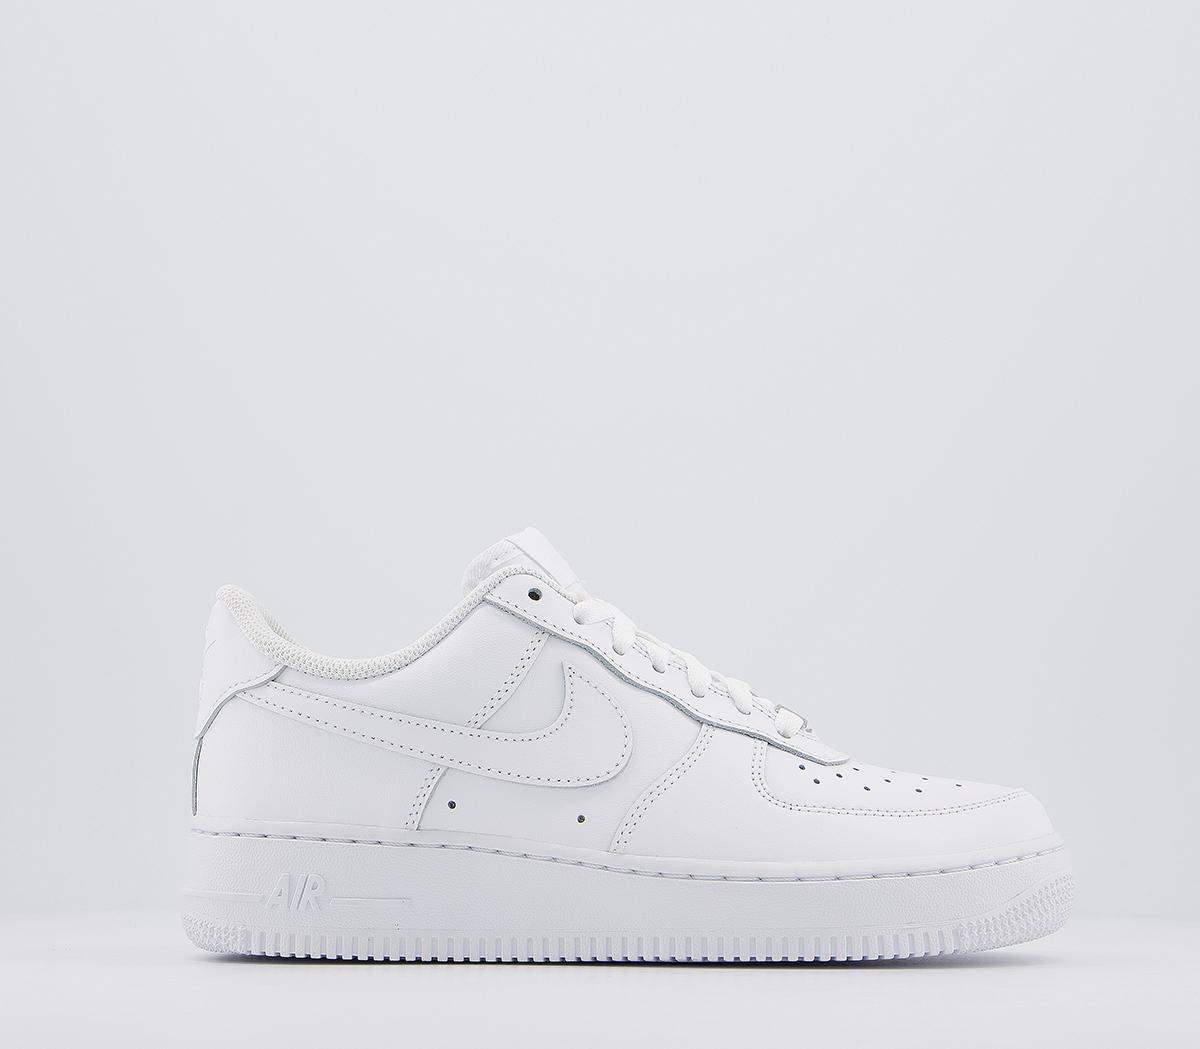 Absorberend Pikken wonder Nike Air Force 1 Trainers White - Unisex Sports